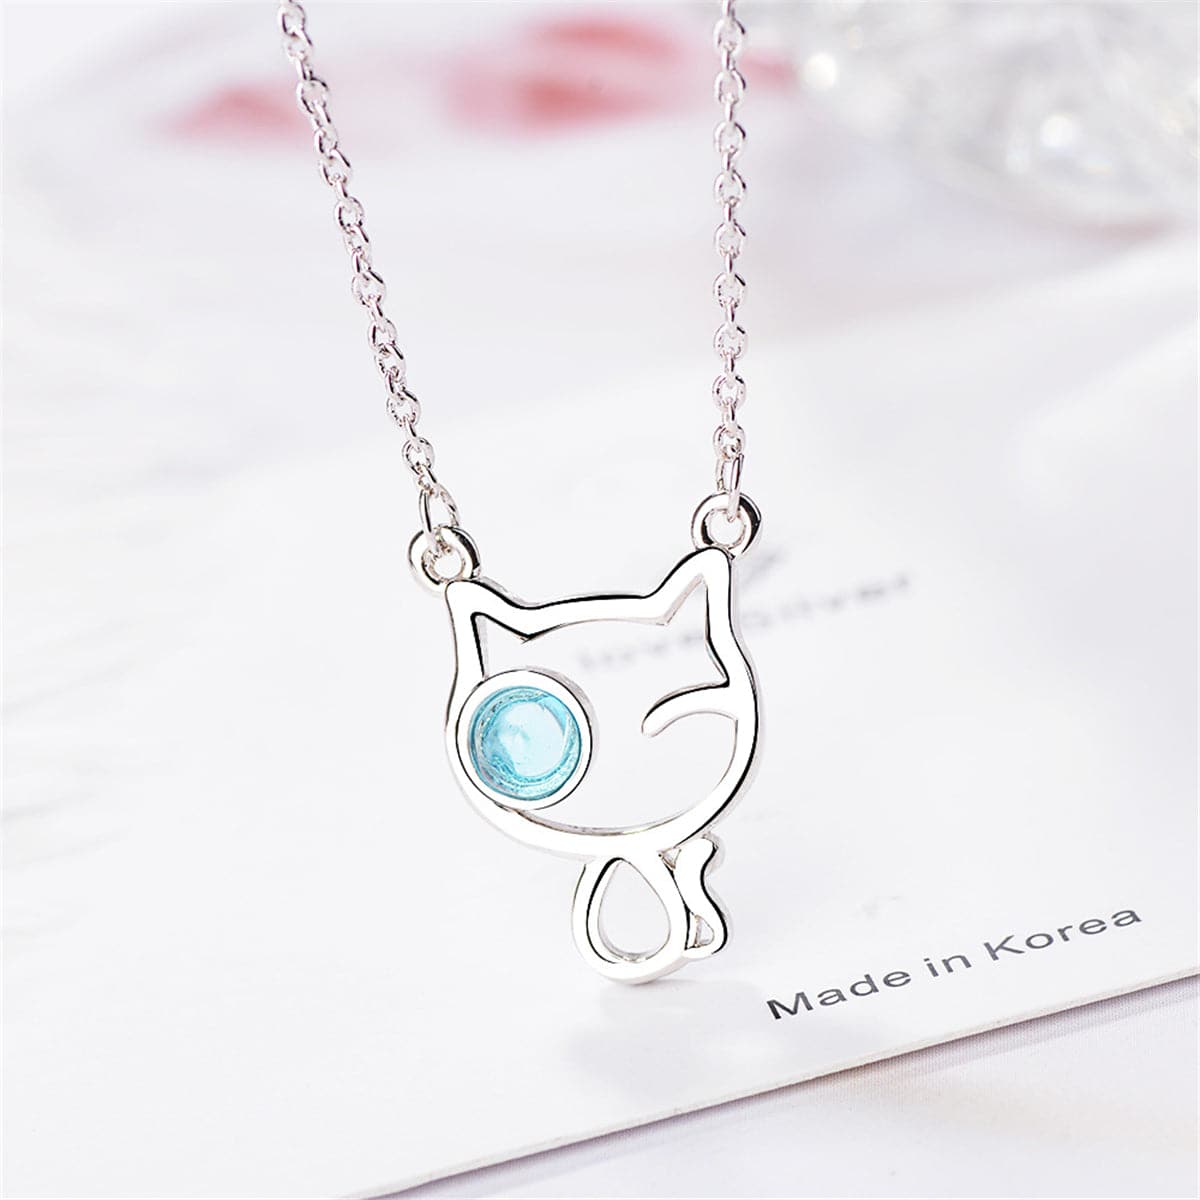 Blue Moonstone & Silver-Plated Cat Pendant Necklace